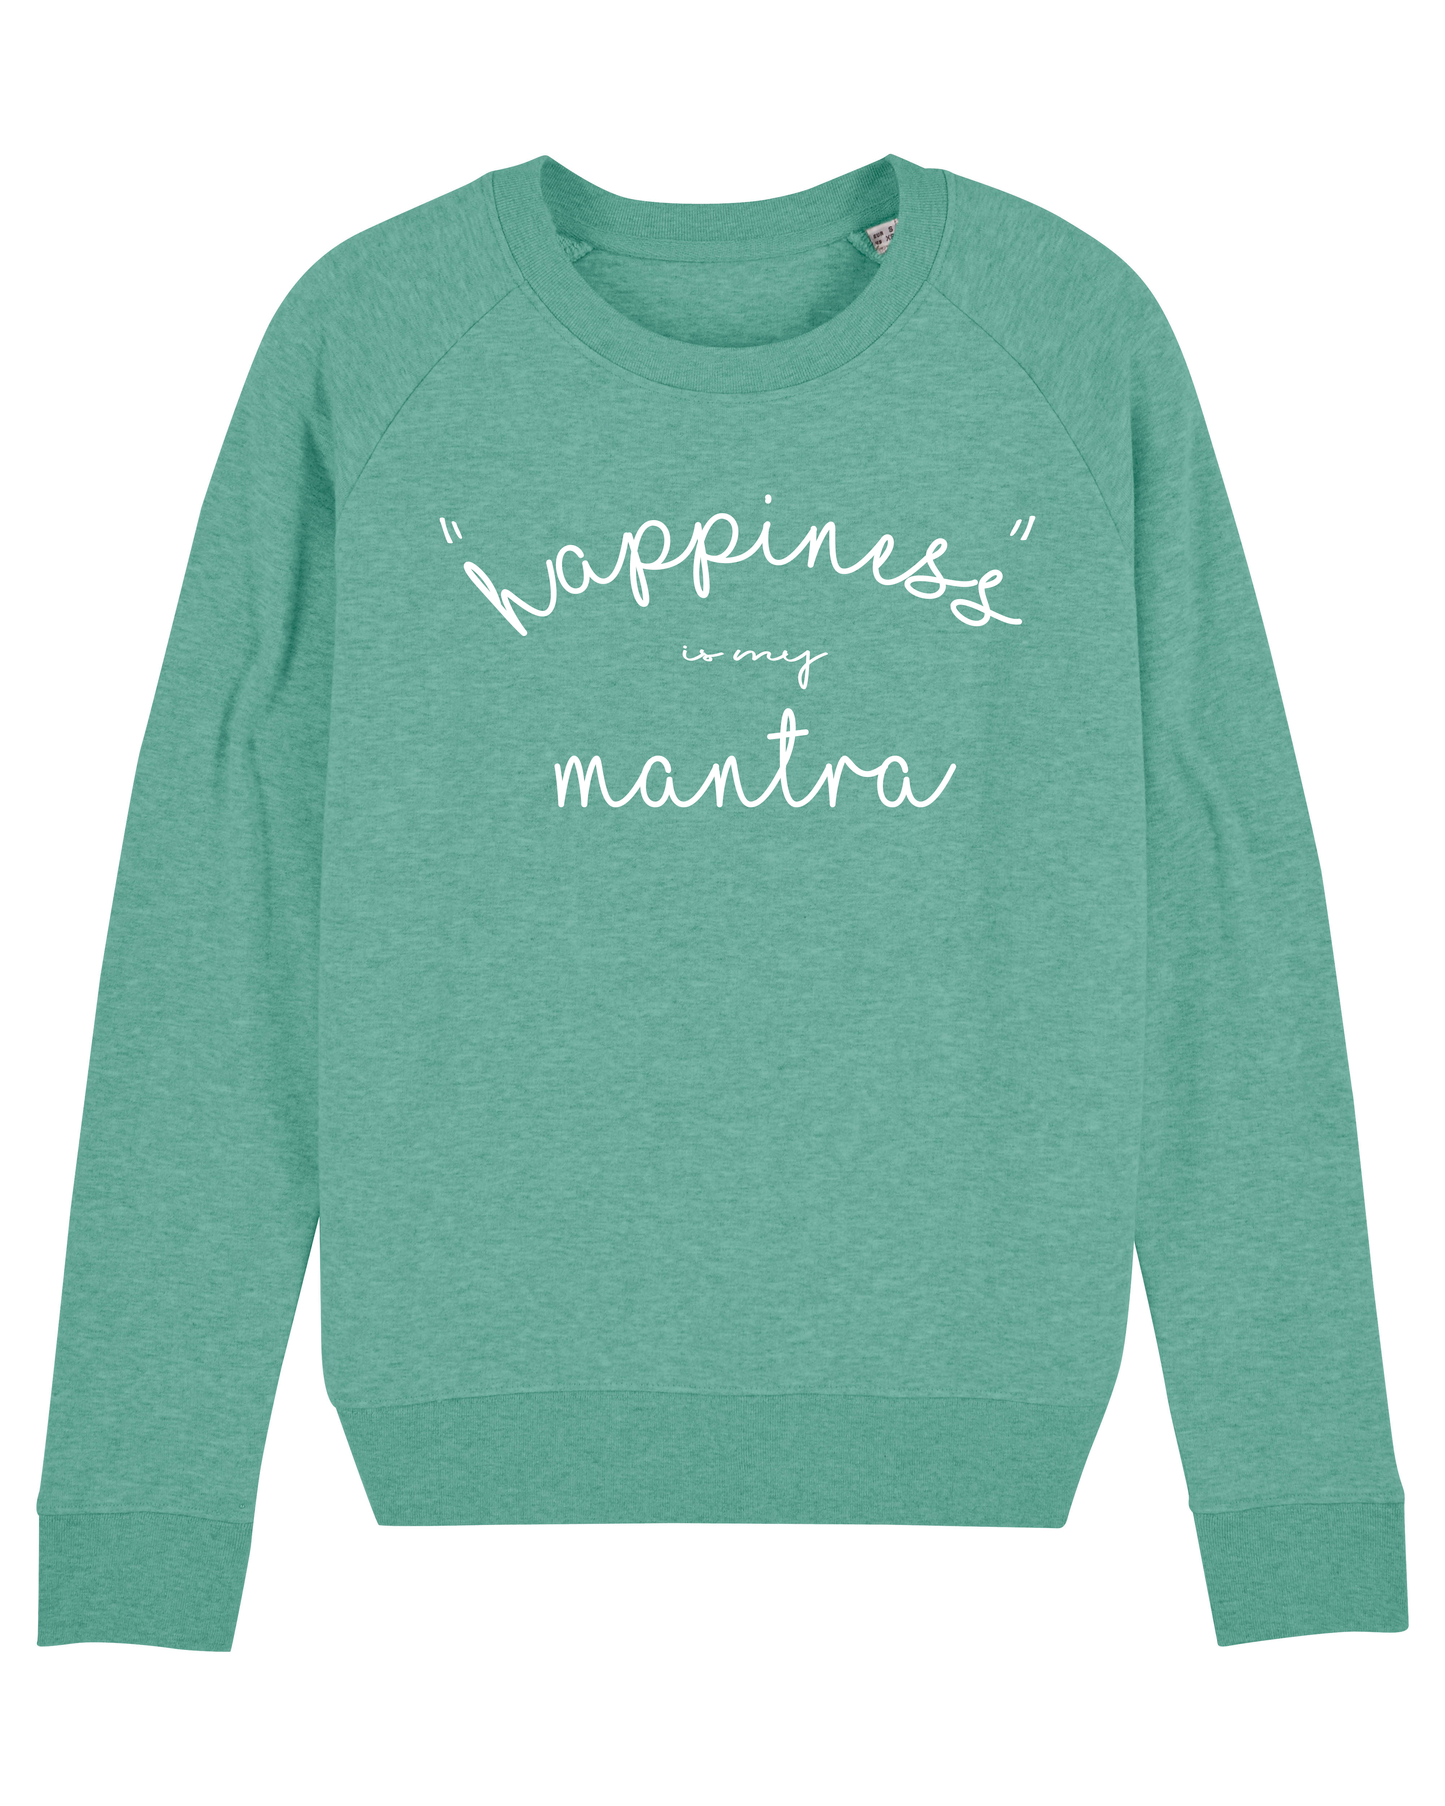 "HAPPINESS" Mantra Sweater